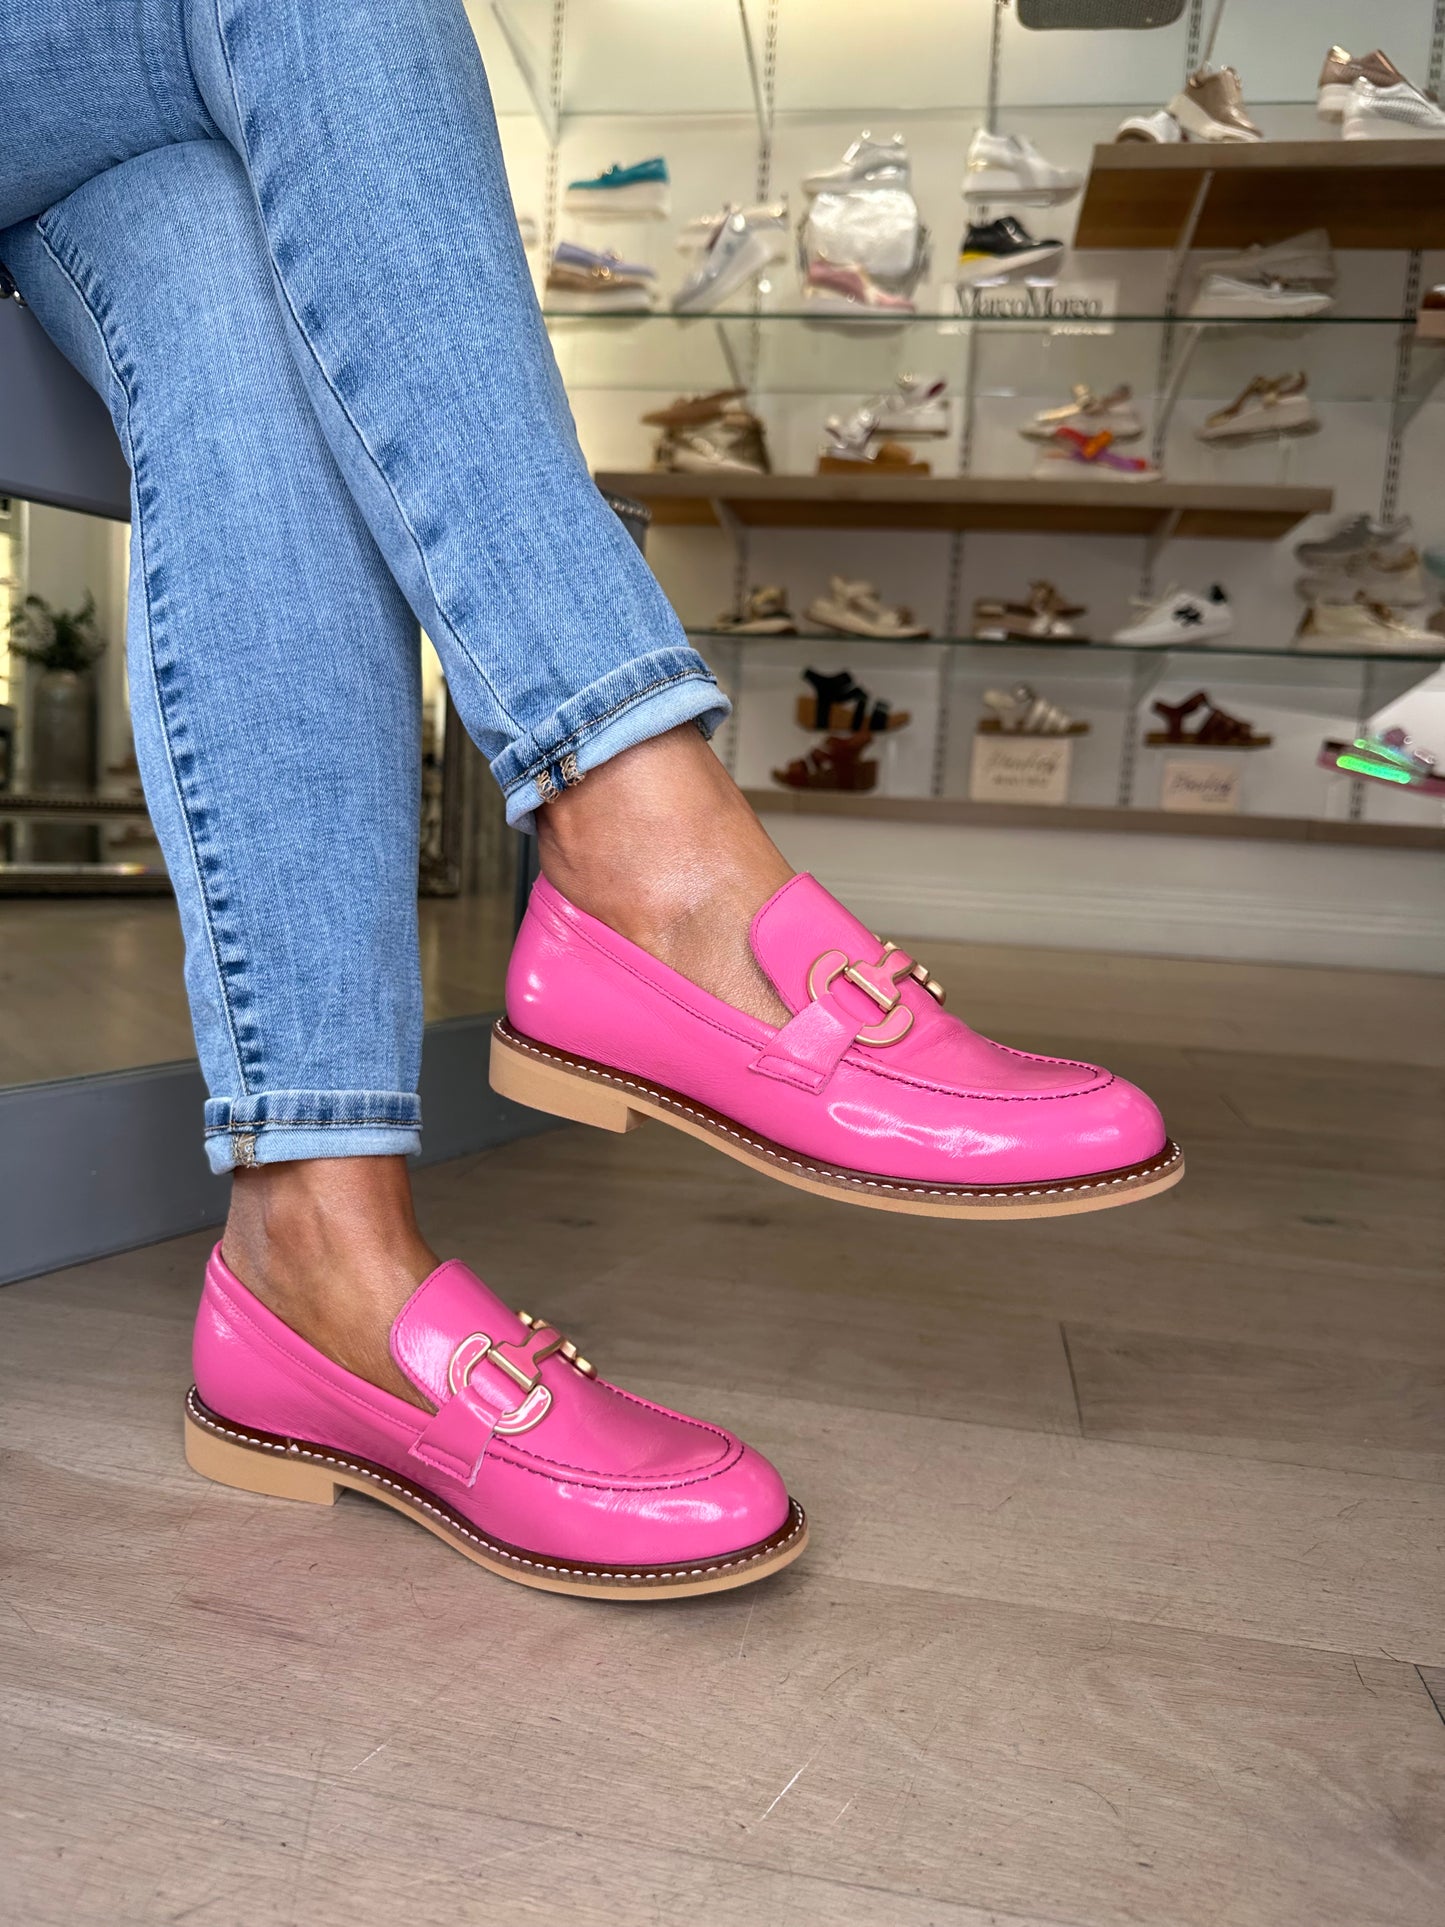 Marian - Hot Pink Nappa Leather Loafer With Chain Trim